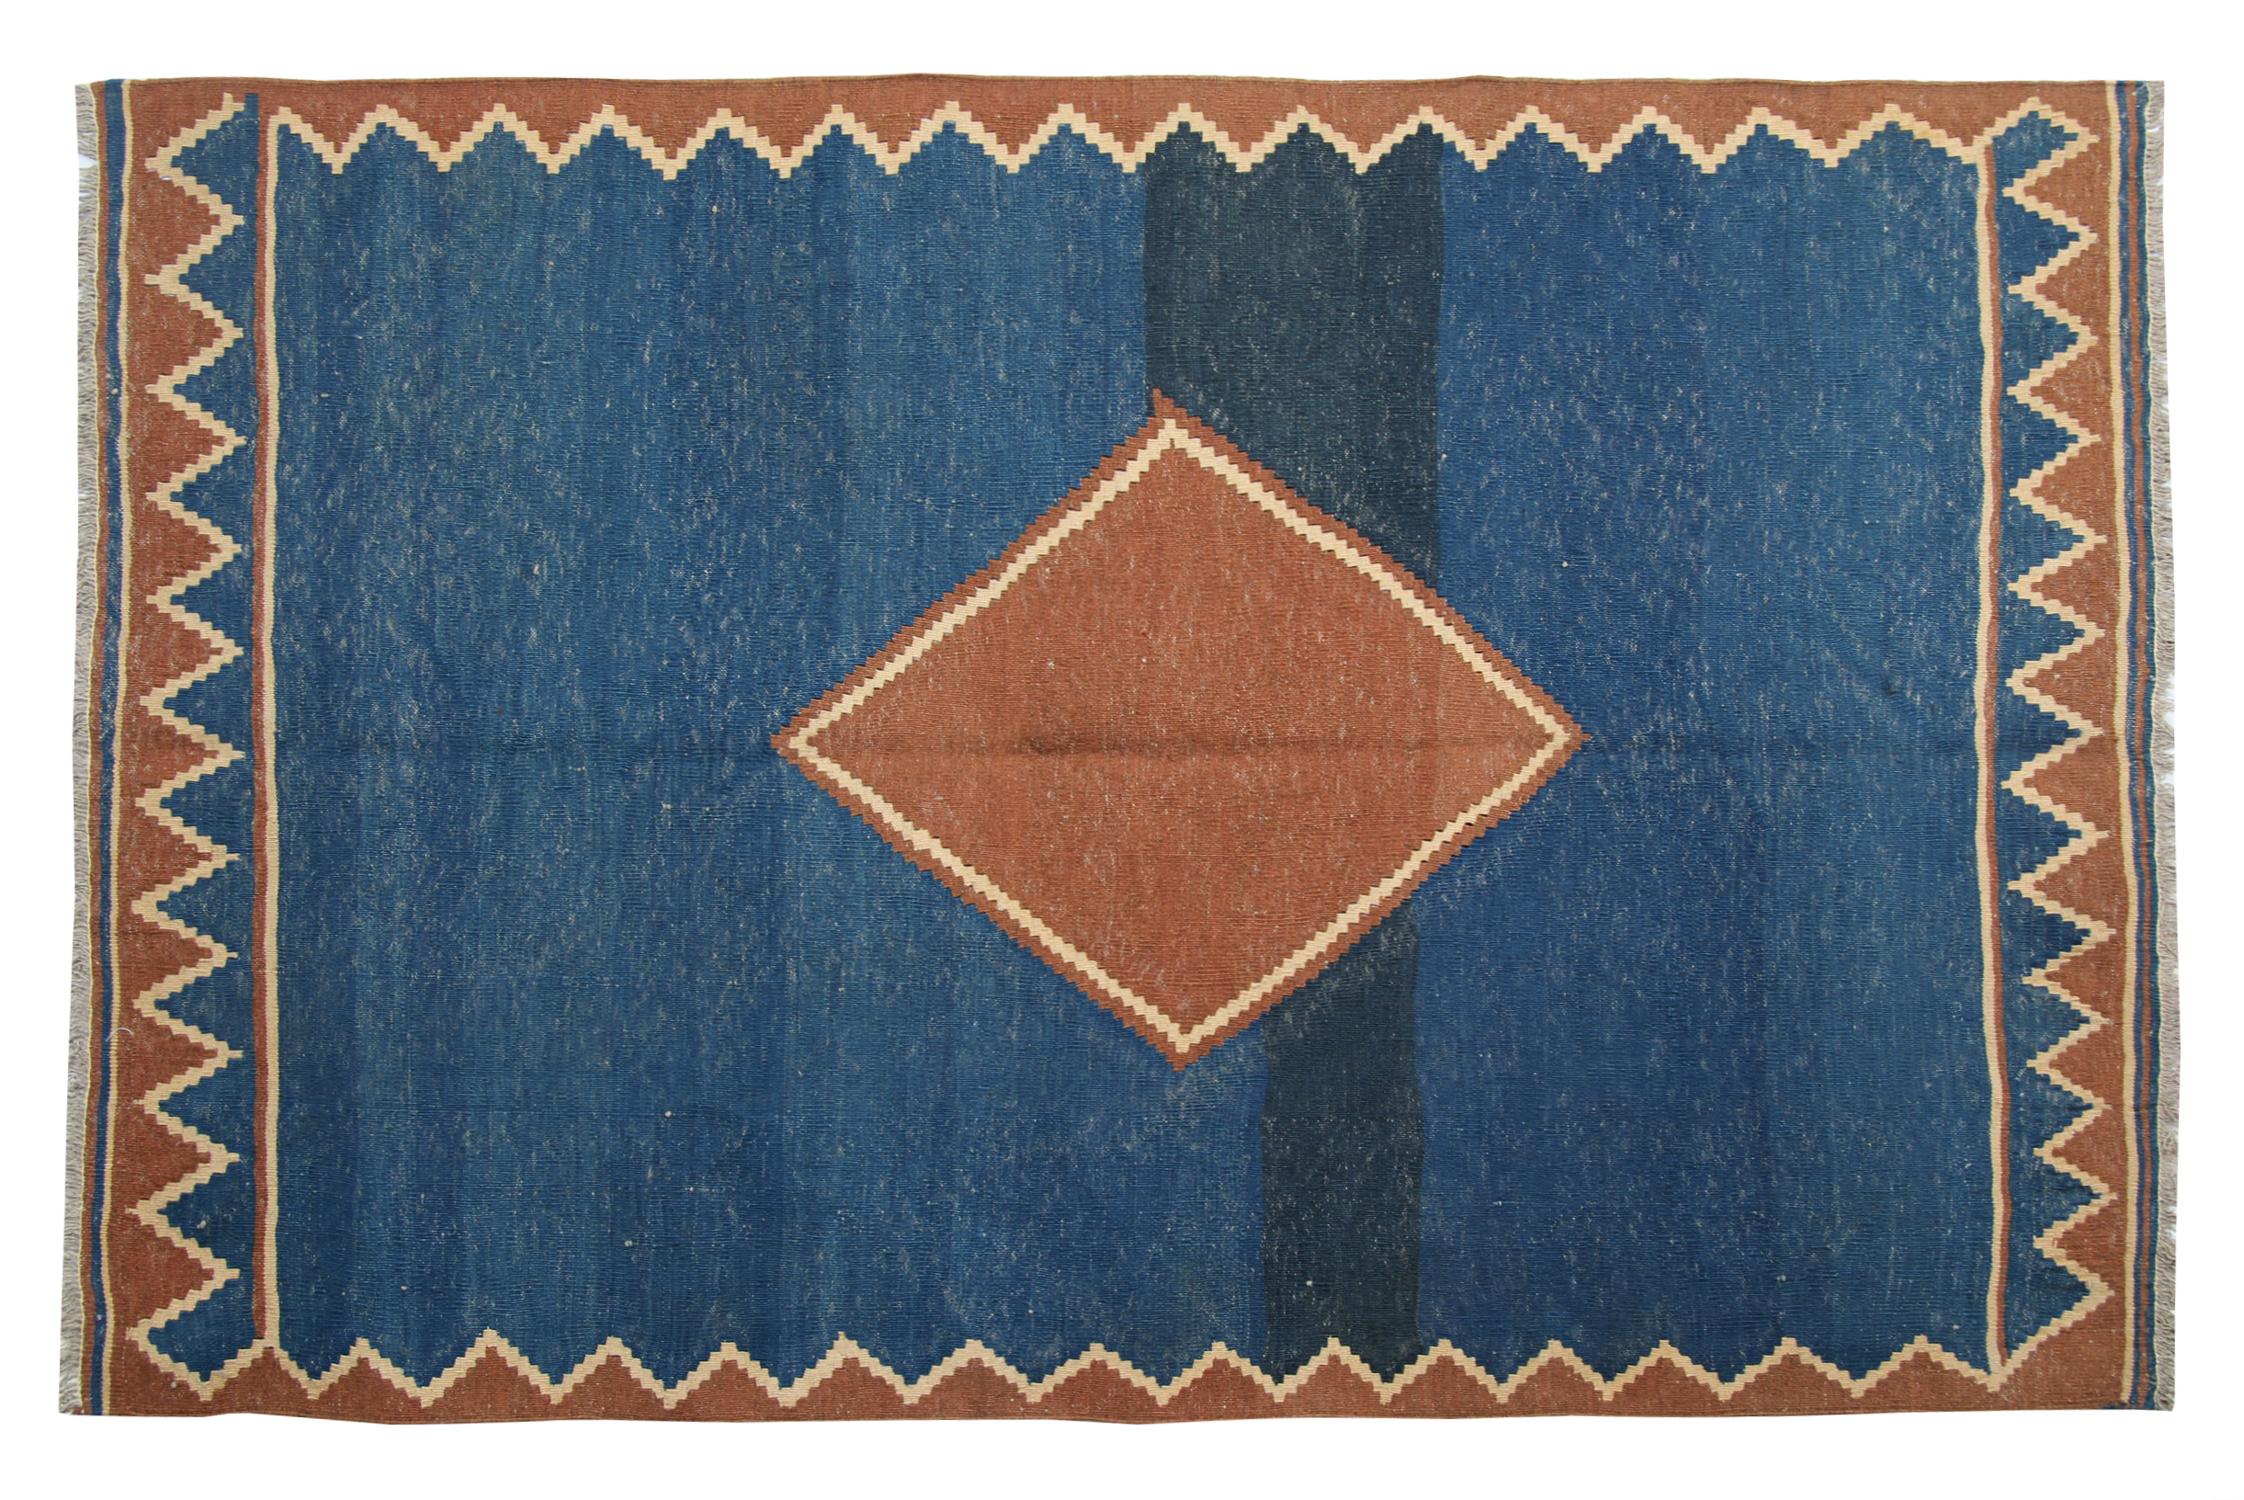 This elegant handwoven wool area rug features a simple color palette of rust, cream and blue. The central medallion is a simple diamond woven in rust and is surrounded by a beautiful open blue field and a zig-zag cream and rust border. Both the